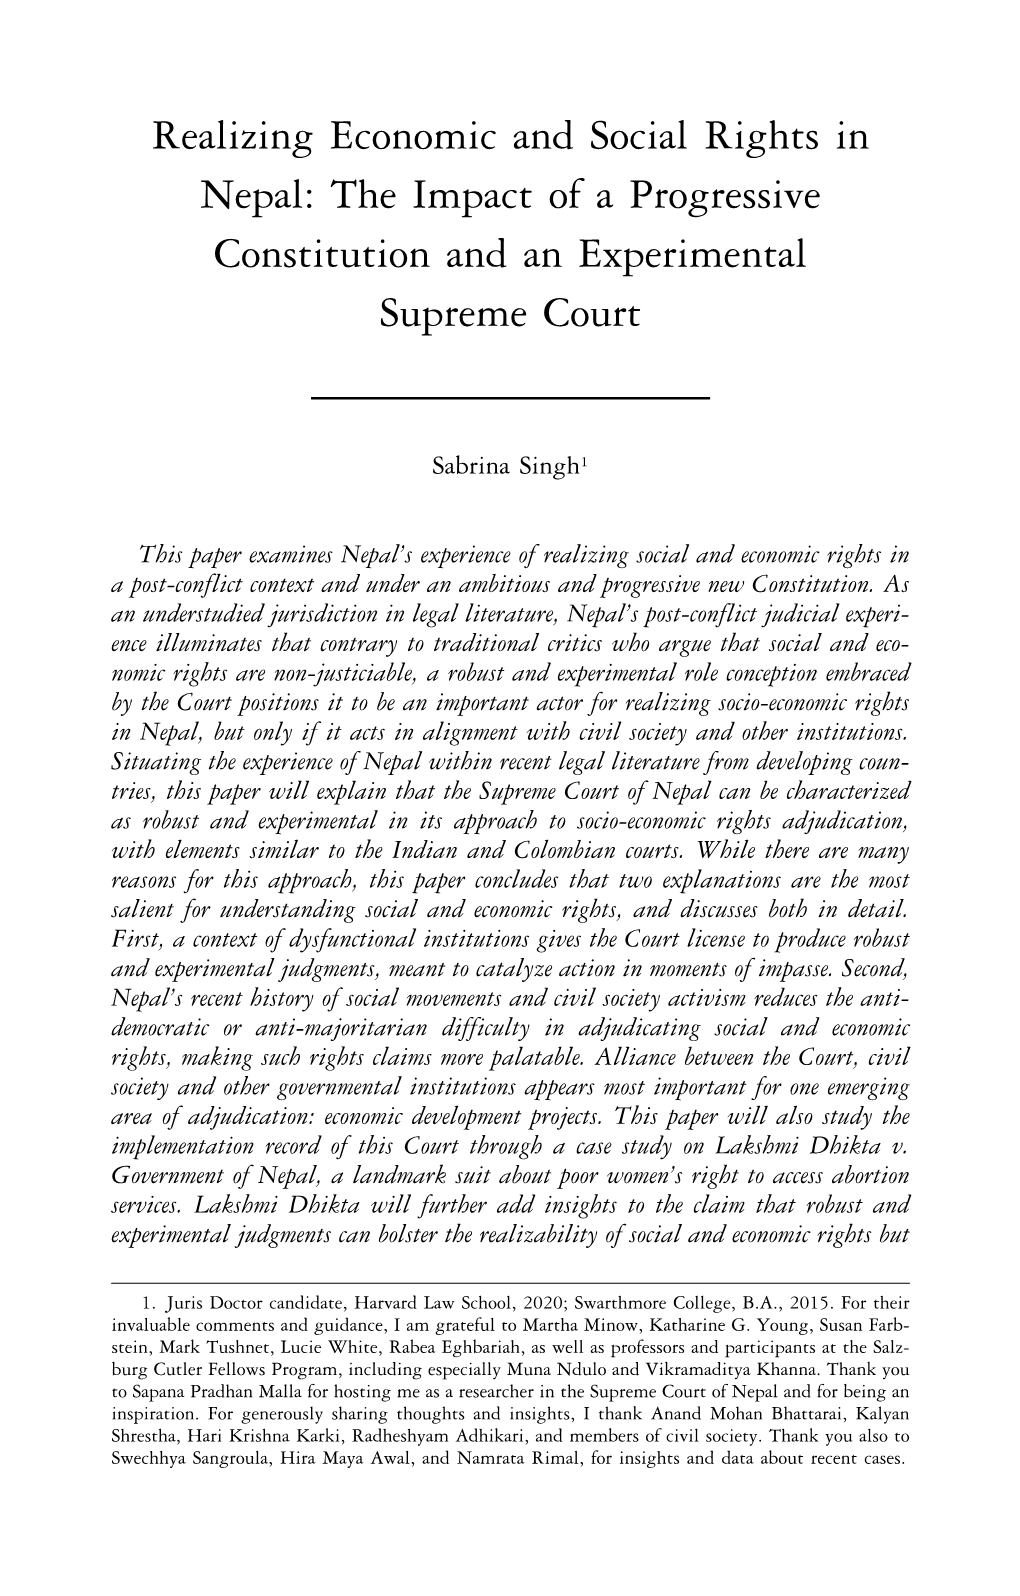 Realizing Economic and Social Rights in Nepal: the Impact of a Progressive Constitution and an Experimental Supreme Court